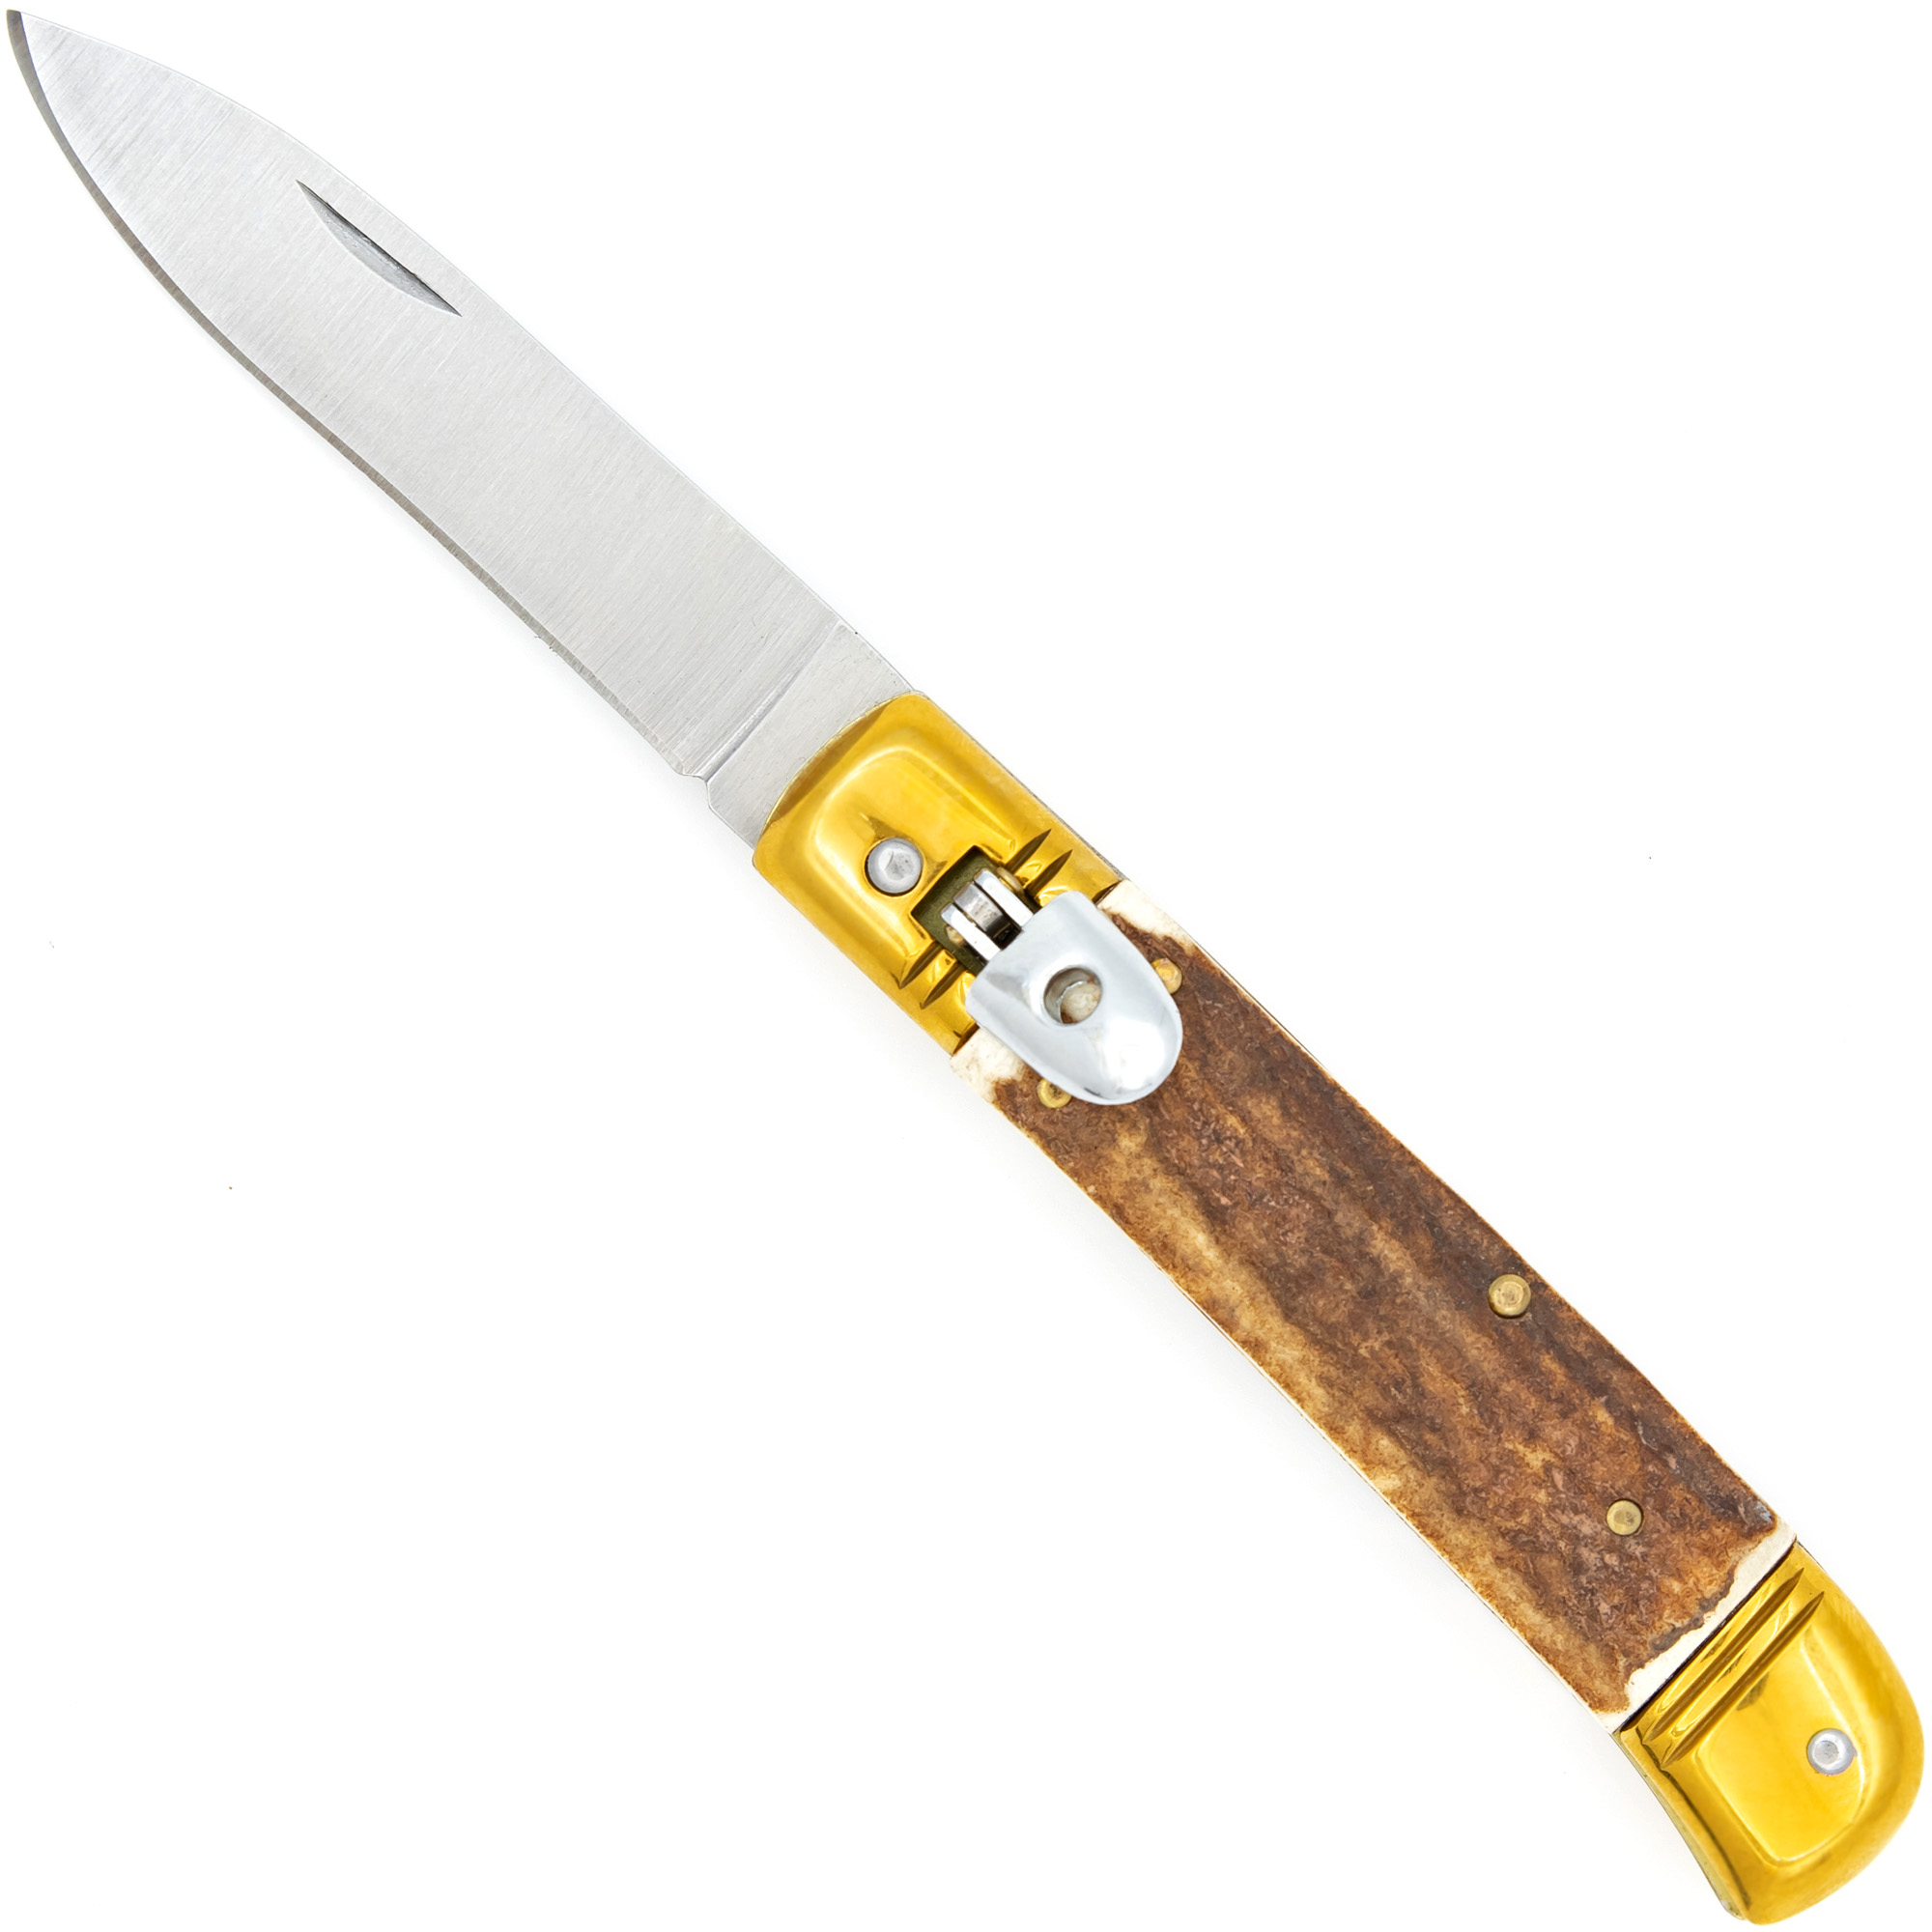 Loose Casing Automatic Lever Lock Staghorn Handle Knife with GOLD Hardware